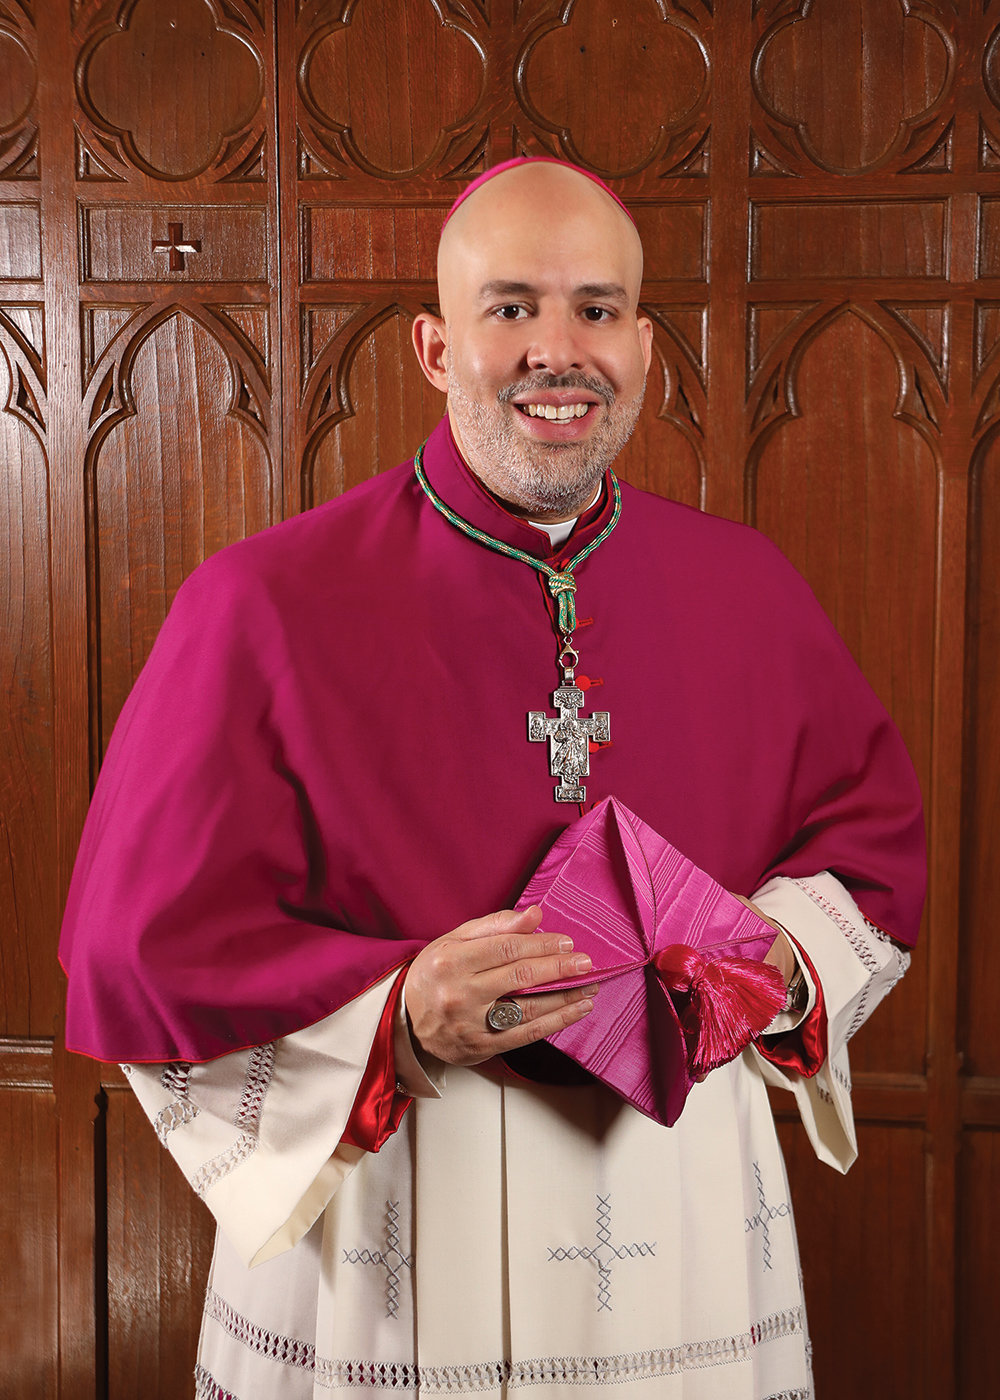 Bishop Espaillat, ordained March 1, is pictured in an official portrait.